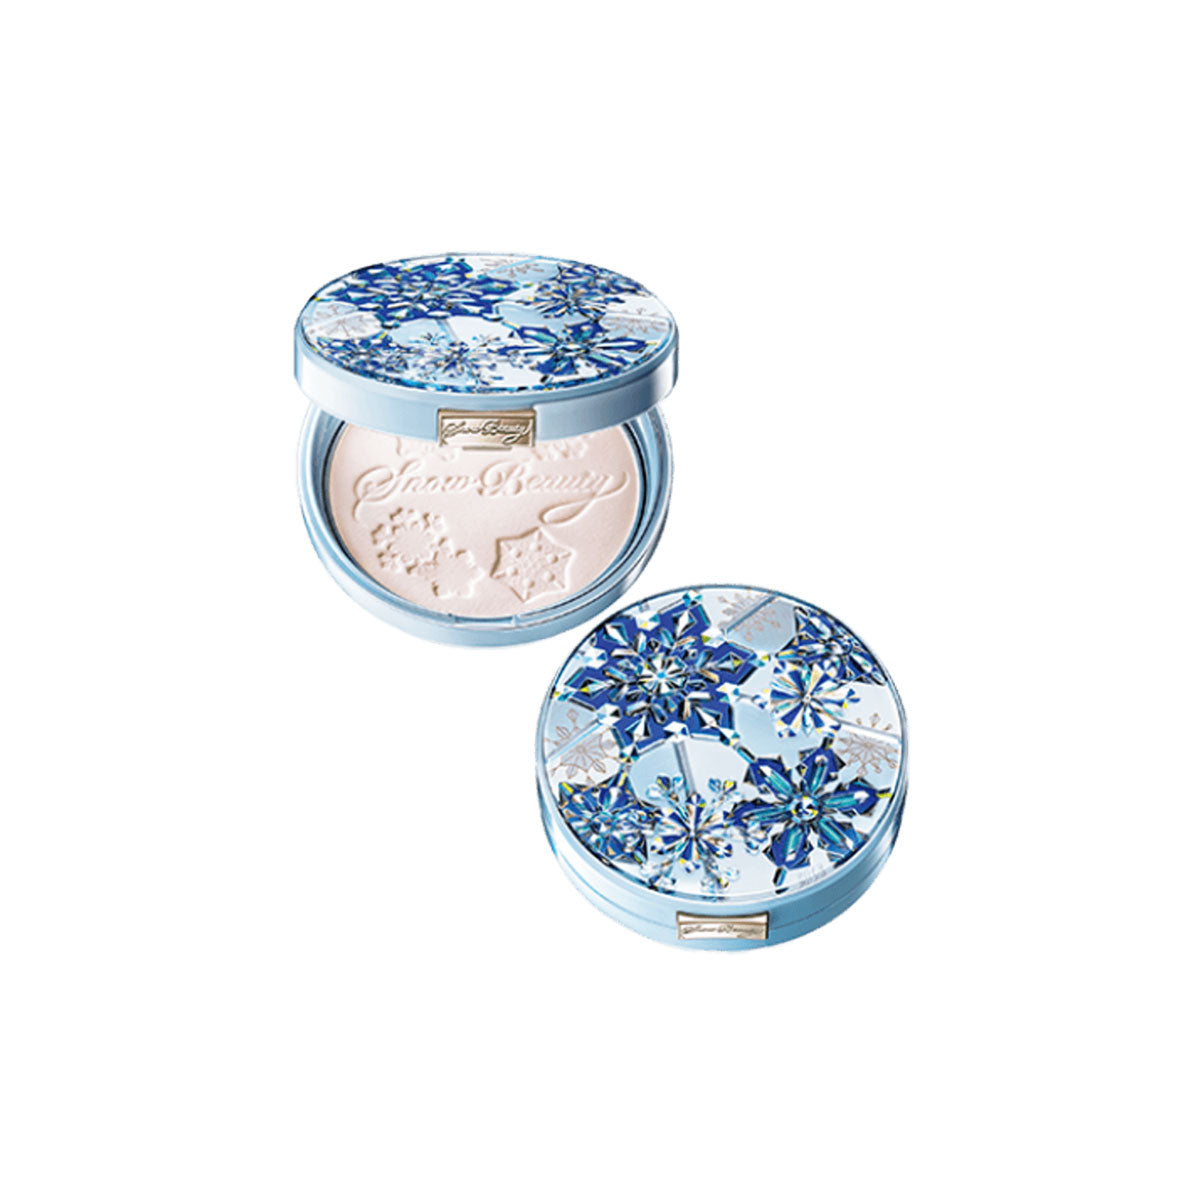 MAQUILLAGE Snow Beauty Whitening Face Powder 25g 2019